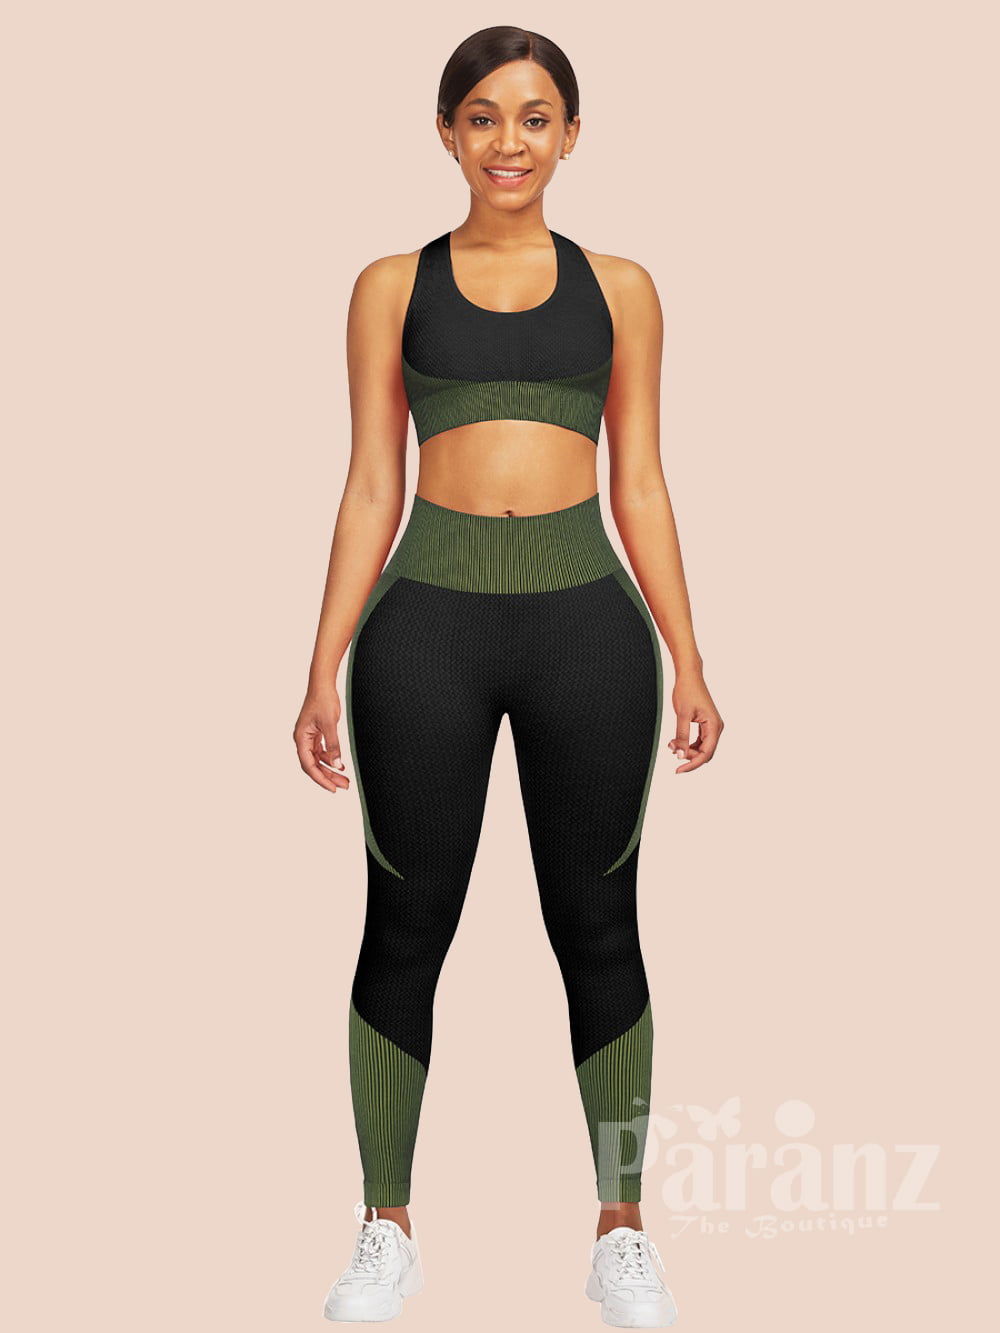 Green Seamless Contrast Color Athletic Suit Kinetic Fashion